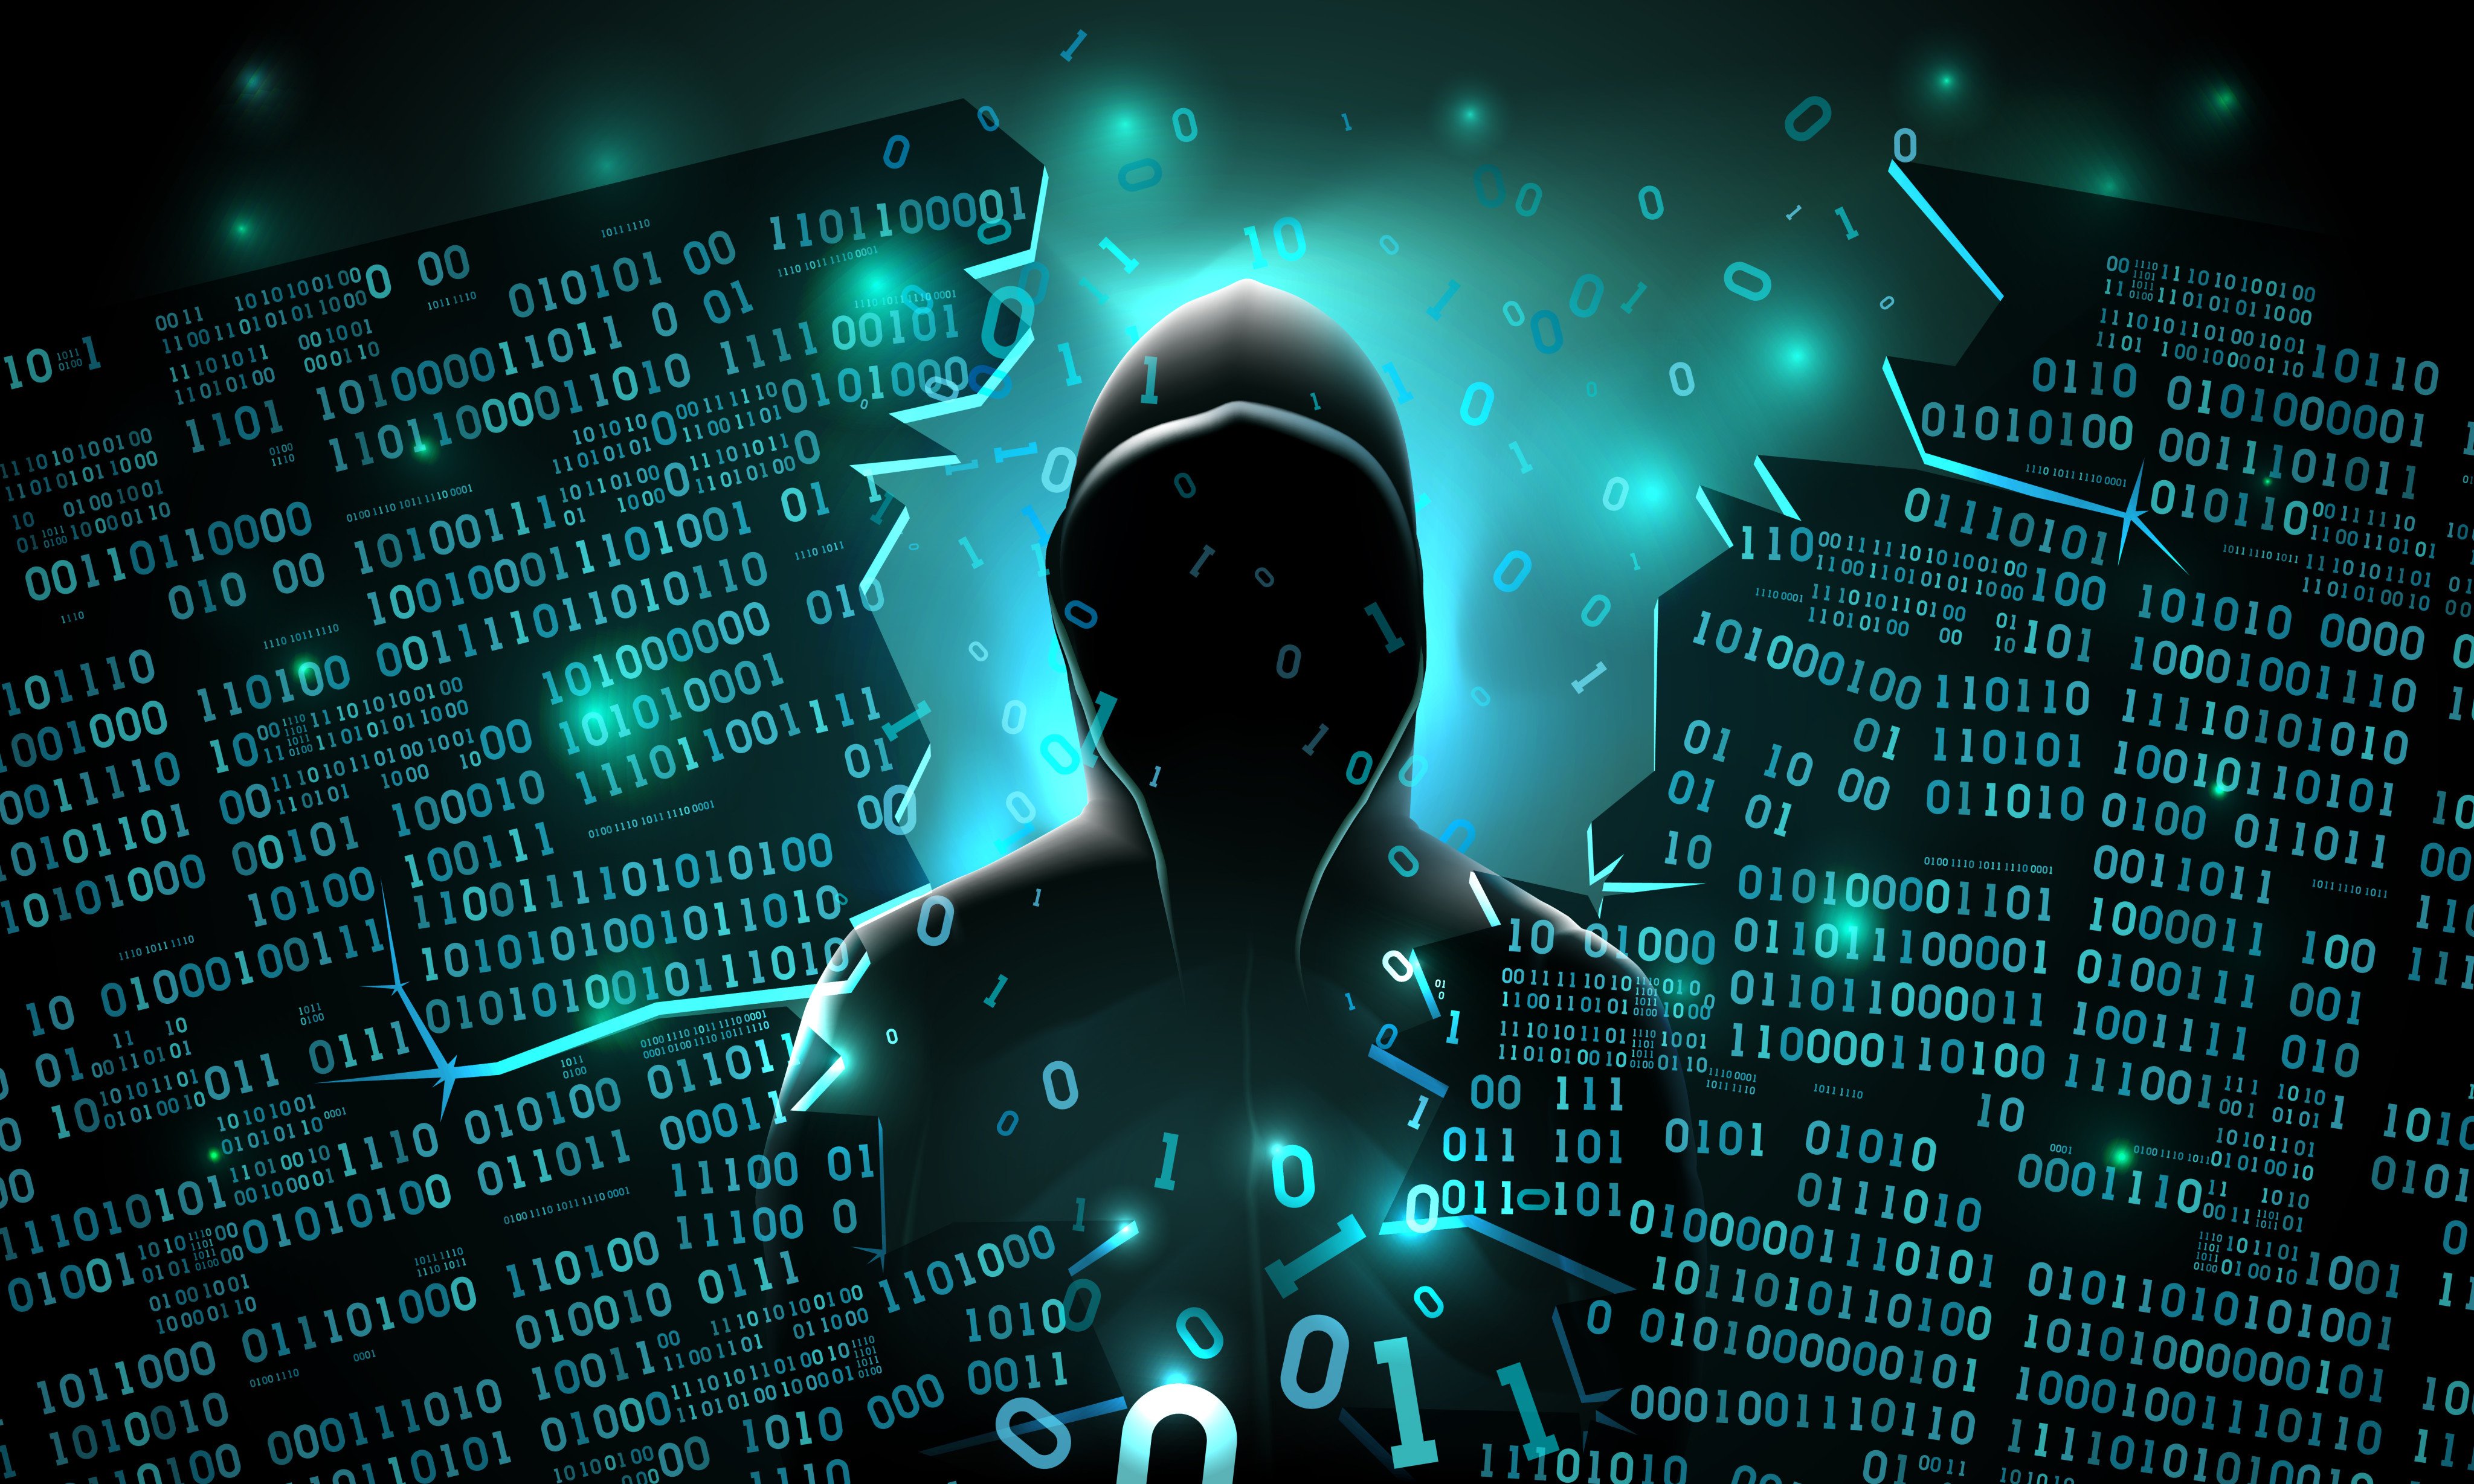 An illustration of a hacker using the internet to hack computer servers. Photo: Shutterstock